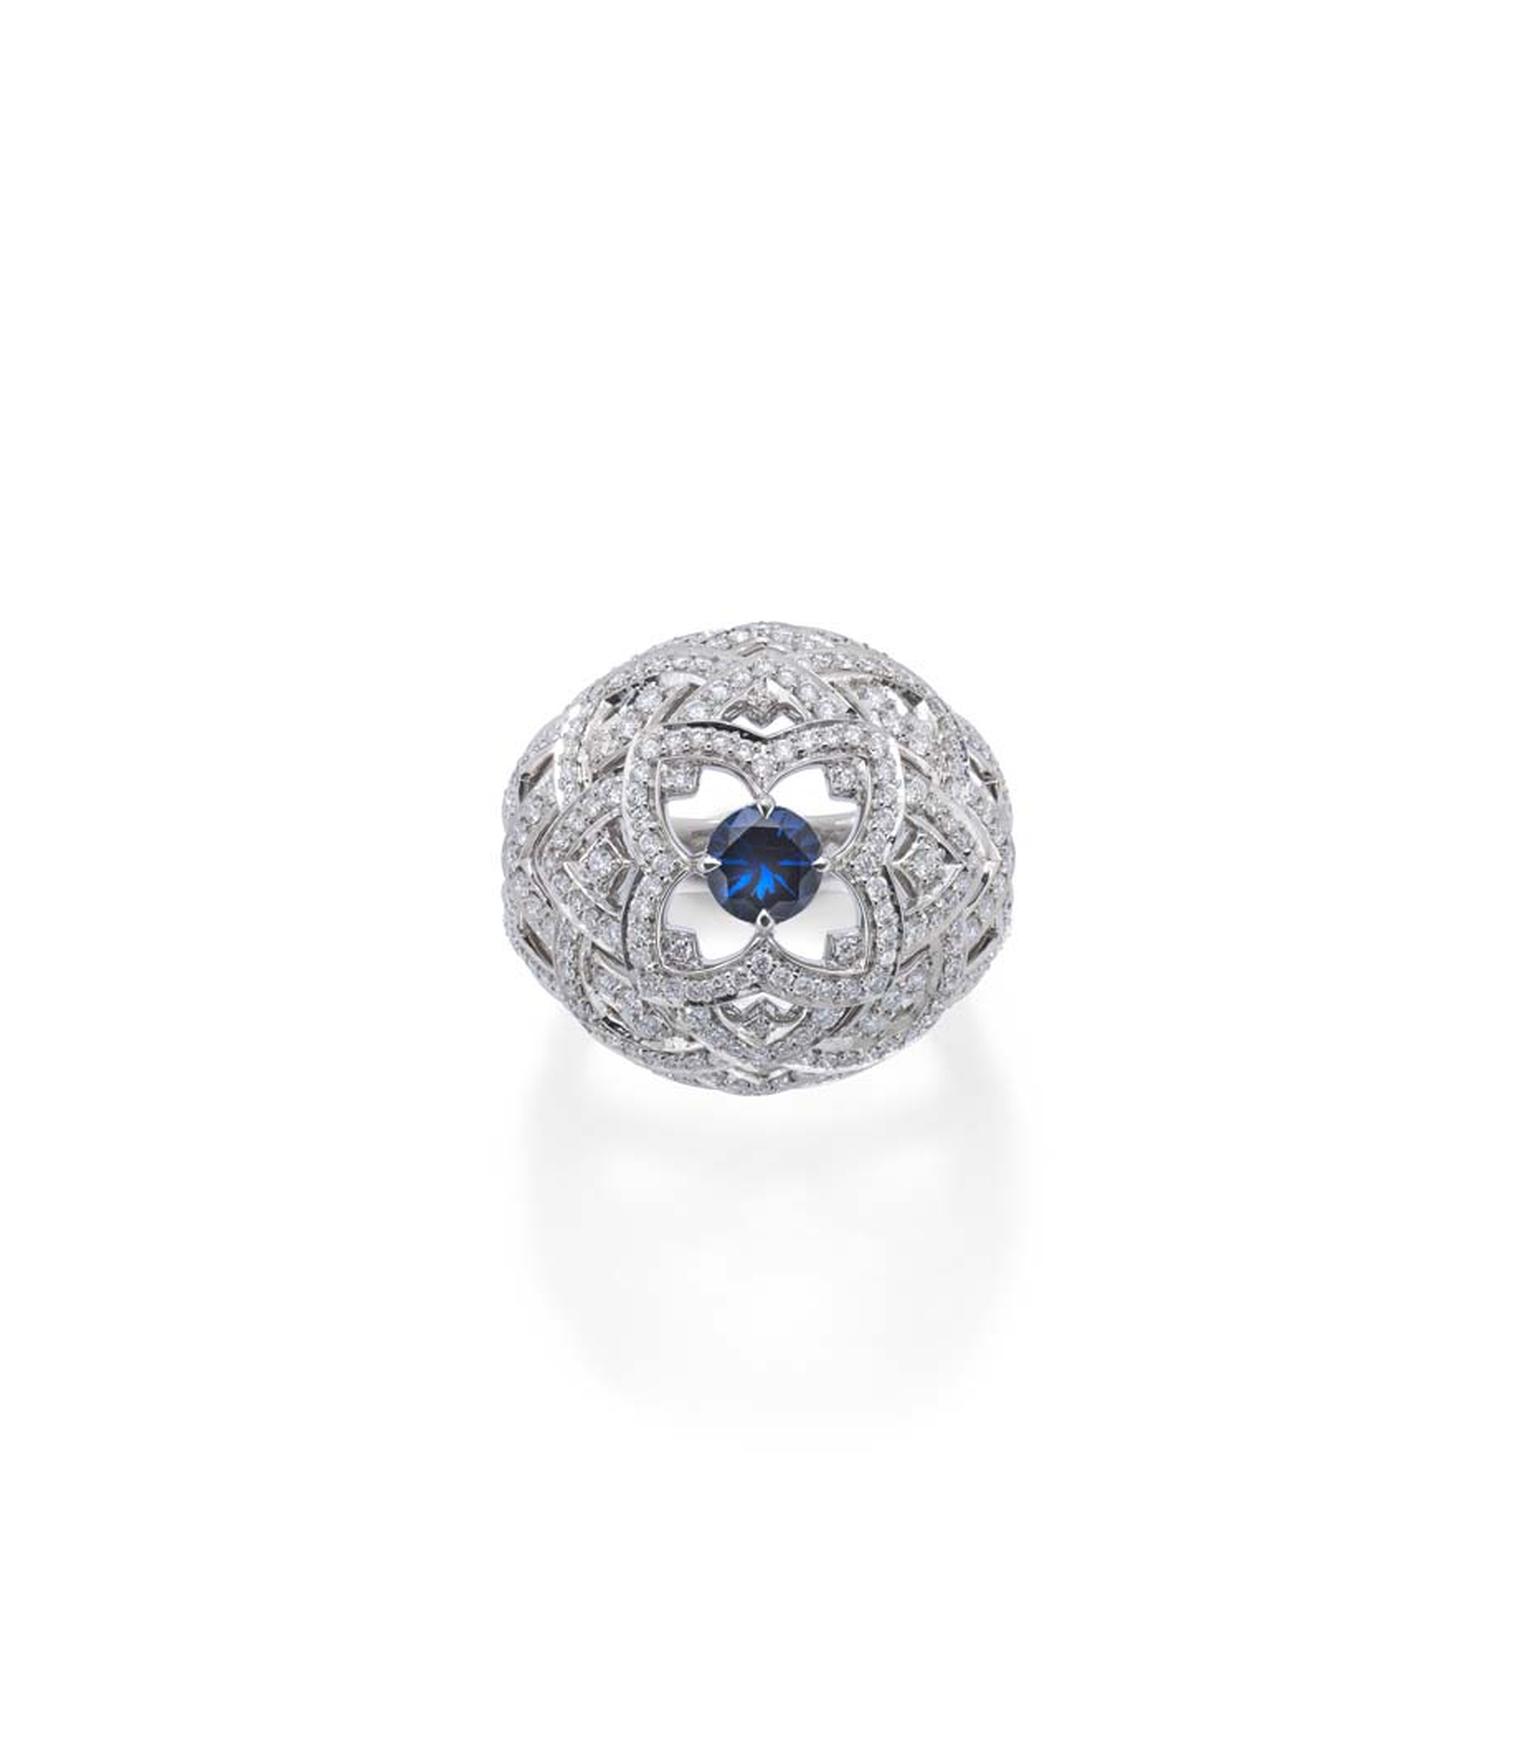 Mappin & Webb Floresco collection Bombe ring with 250 diamonds surrounding a centre sapphire.